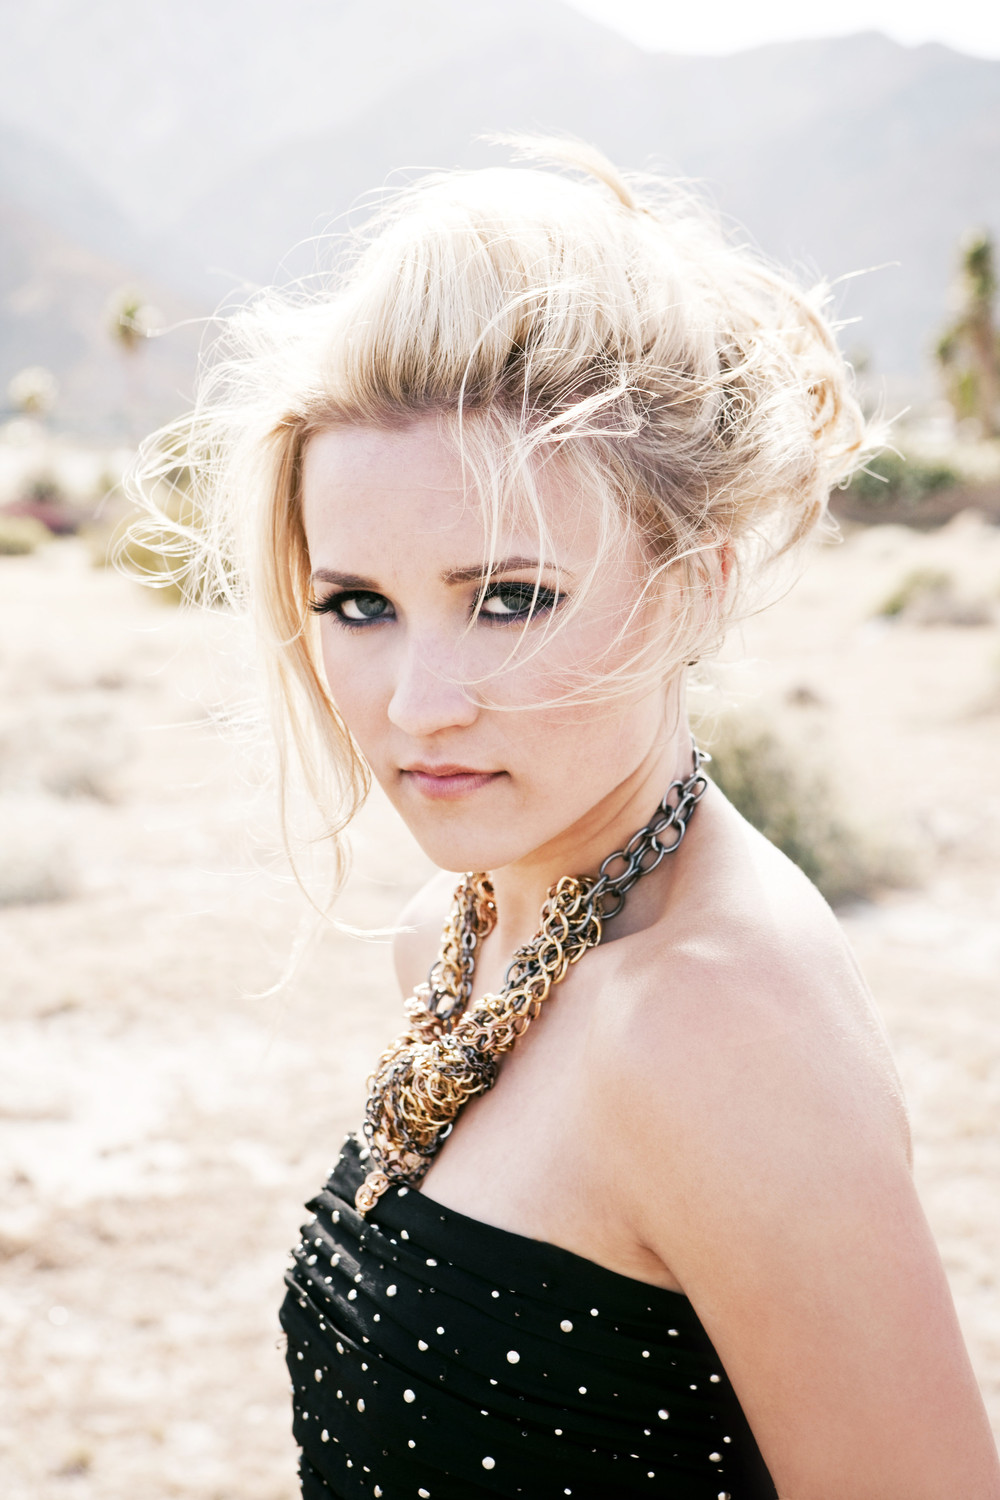 Best of Emily osment nude pics